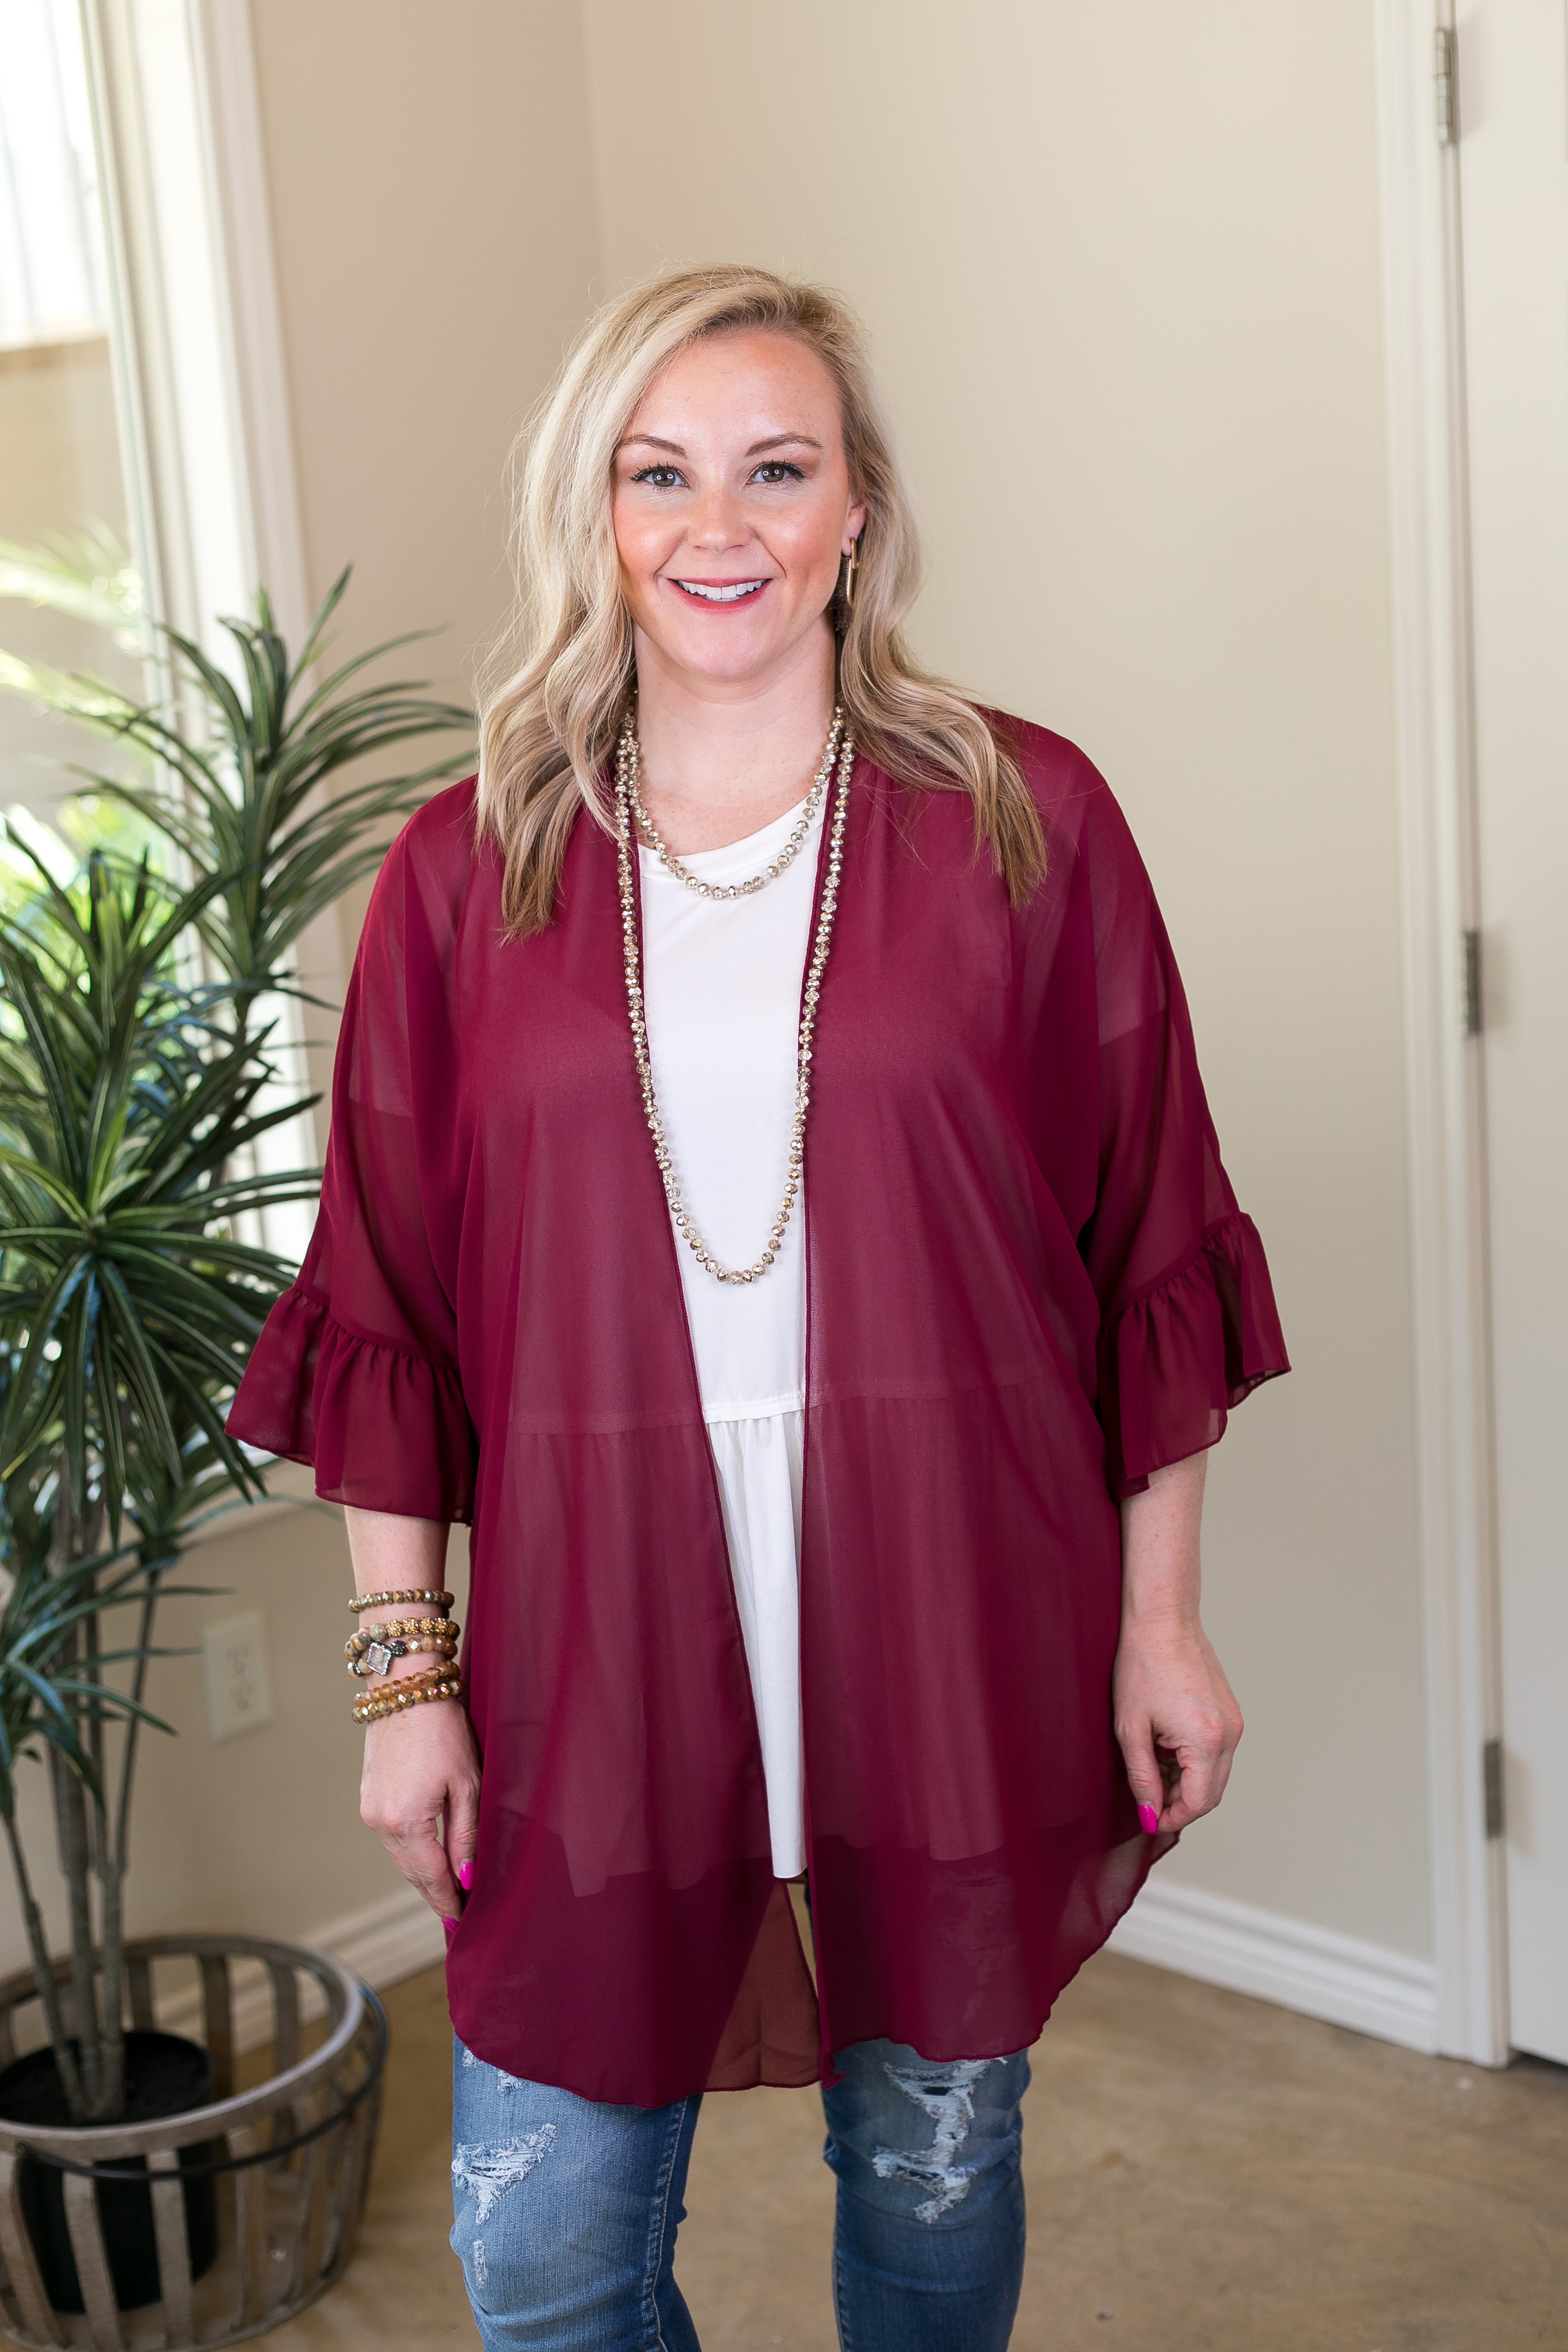 Tell Me About It Sheer Kimono with Ruffle Sleeves in Maroon - Giddy Up Glamour Boutique